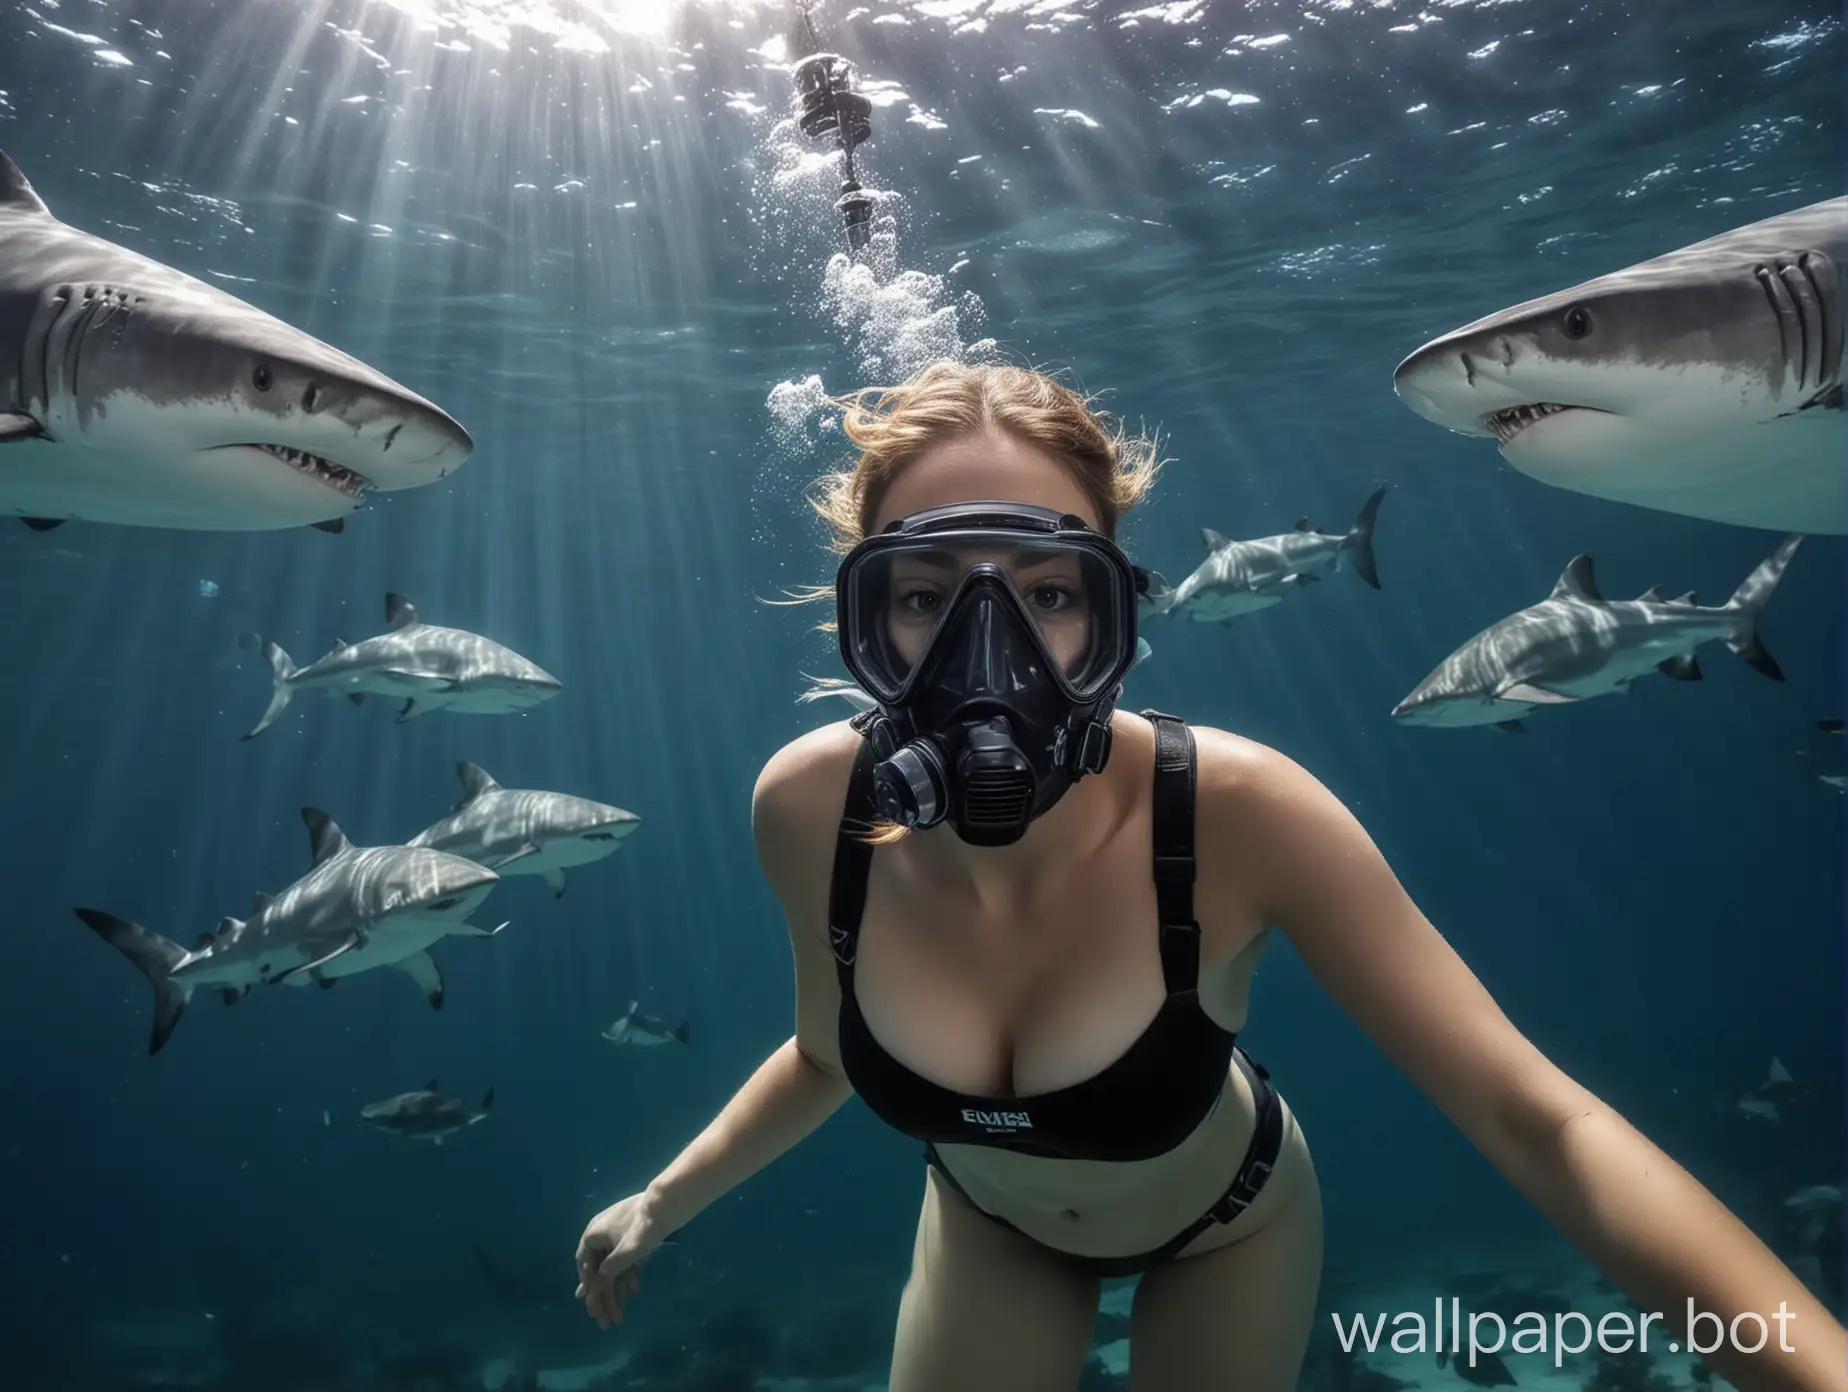 Naked-Diver-with-Scuba-Tank-Amidst-Sharks-Underwater-Exploration